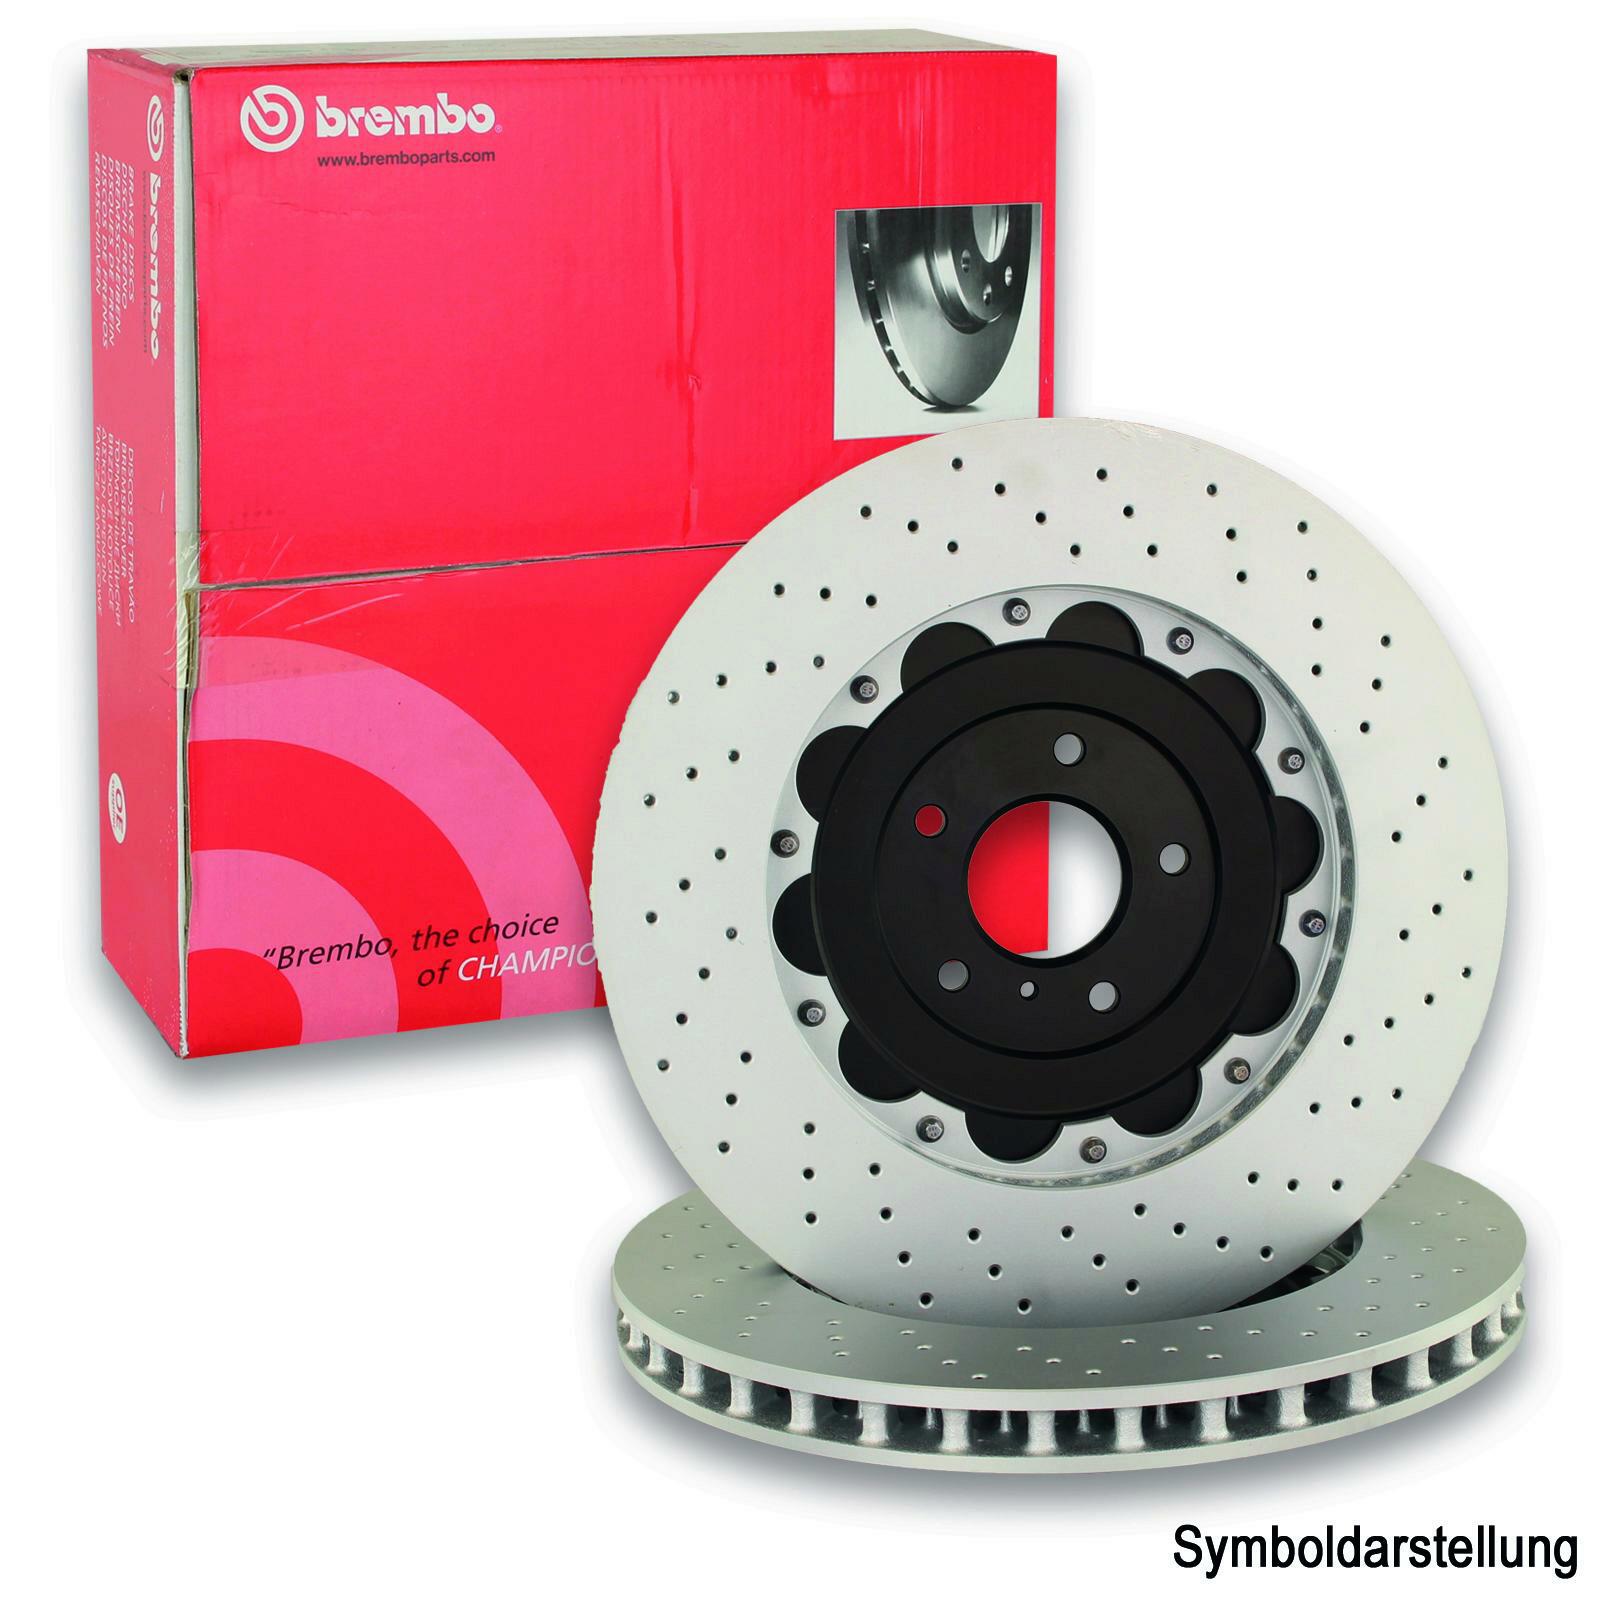 2x BREMBO Brake Disc TWO-PIECE FLOATING DISCS LINE